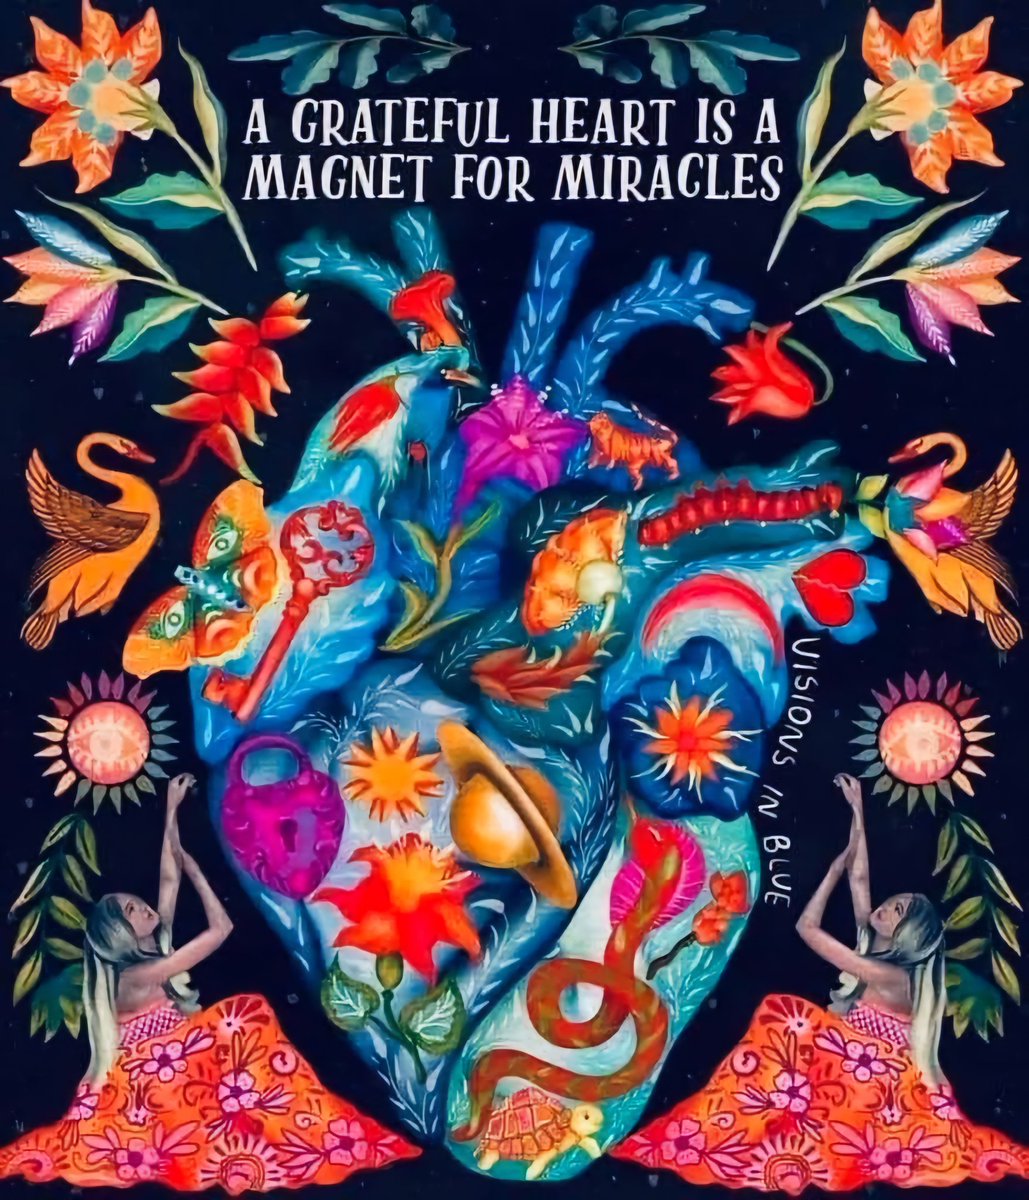 A GRATEFUL HEART IS A MAGNET FOR MIRAGLES